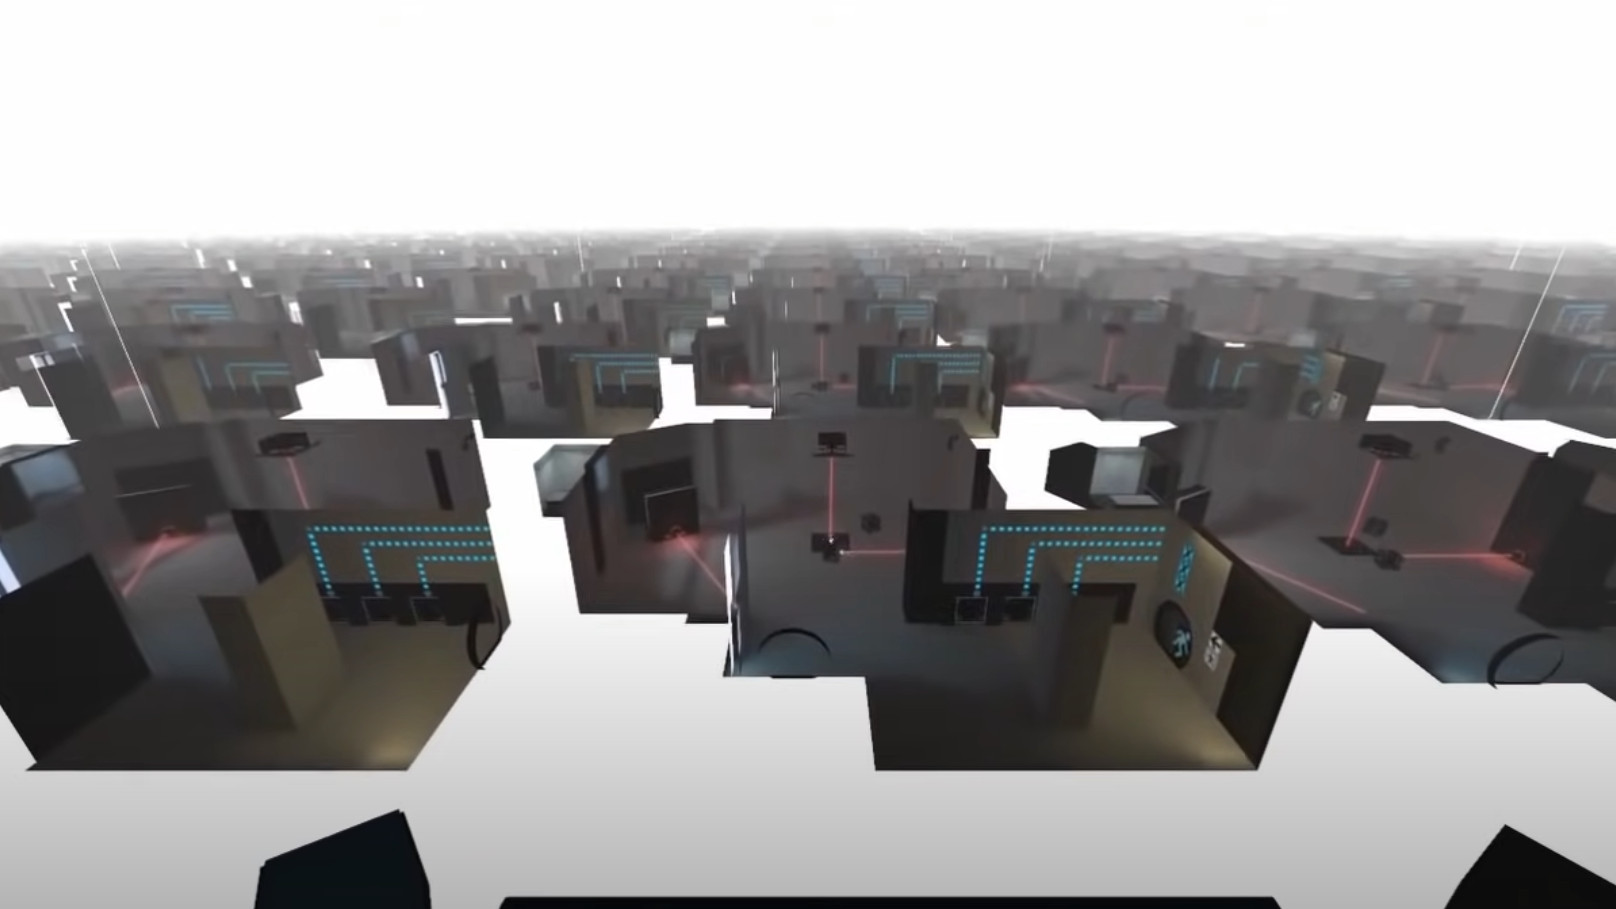  I'm in love with these truly cursed Portal 2 maps 